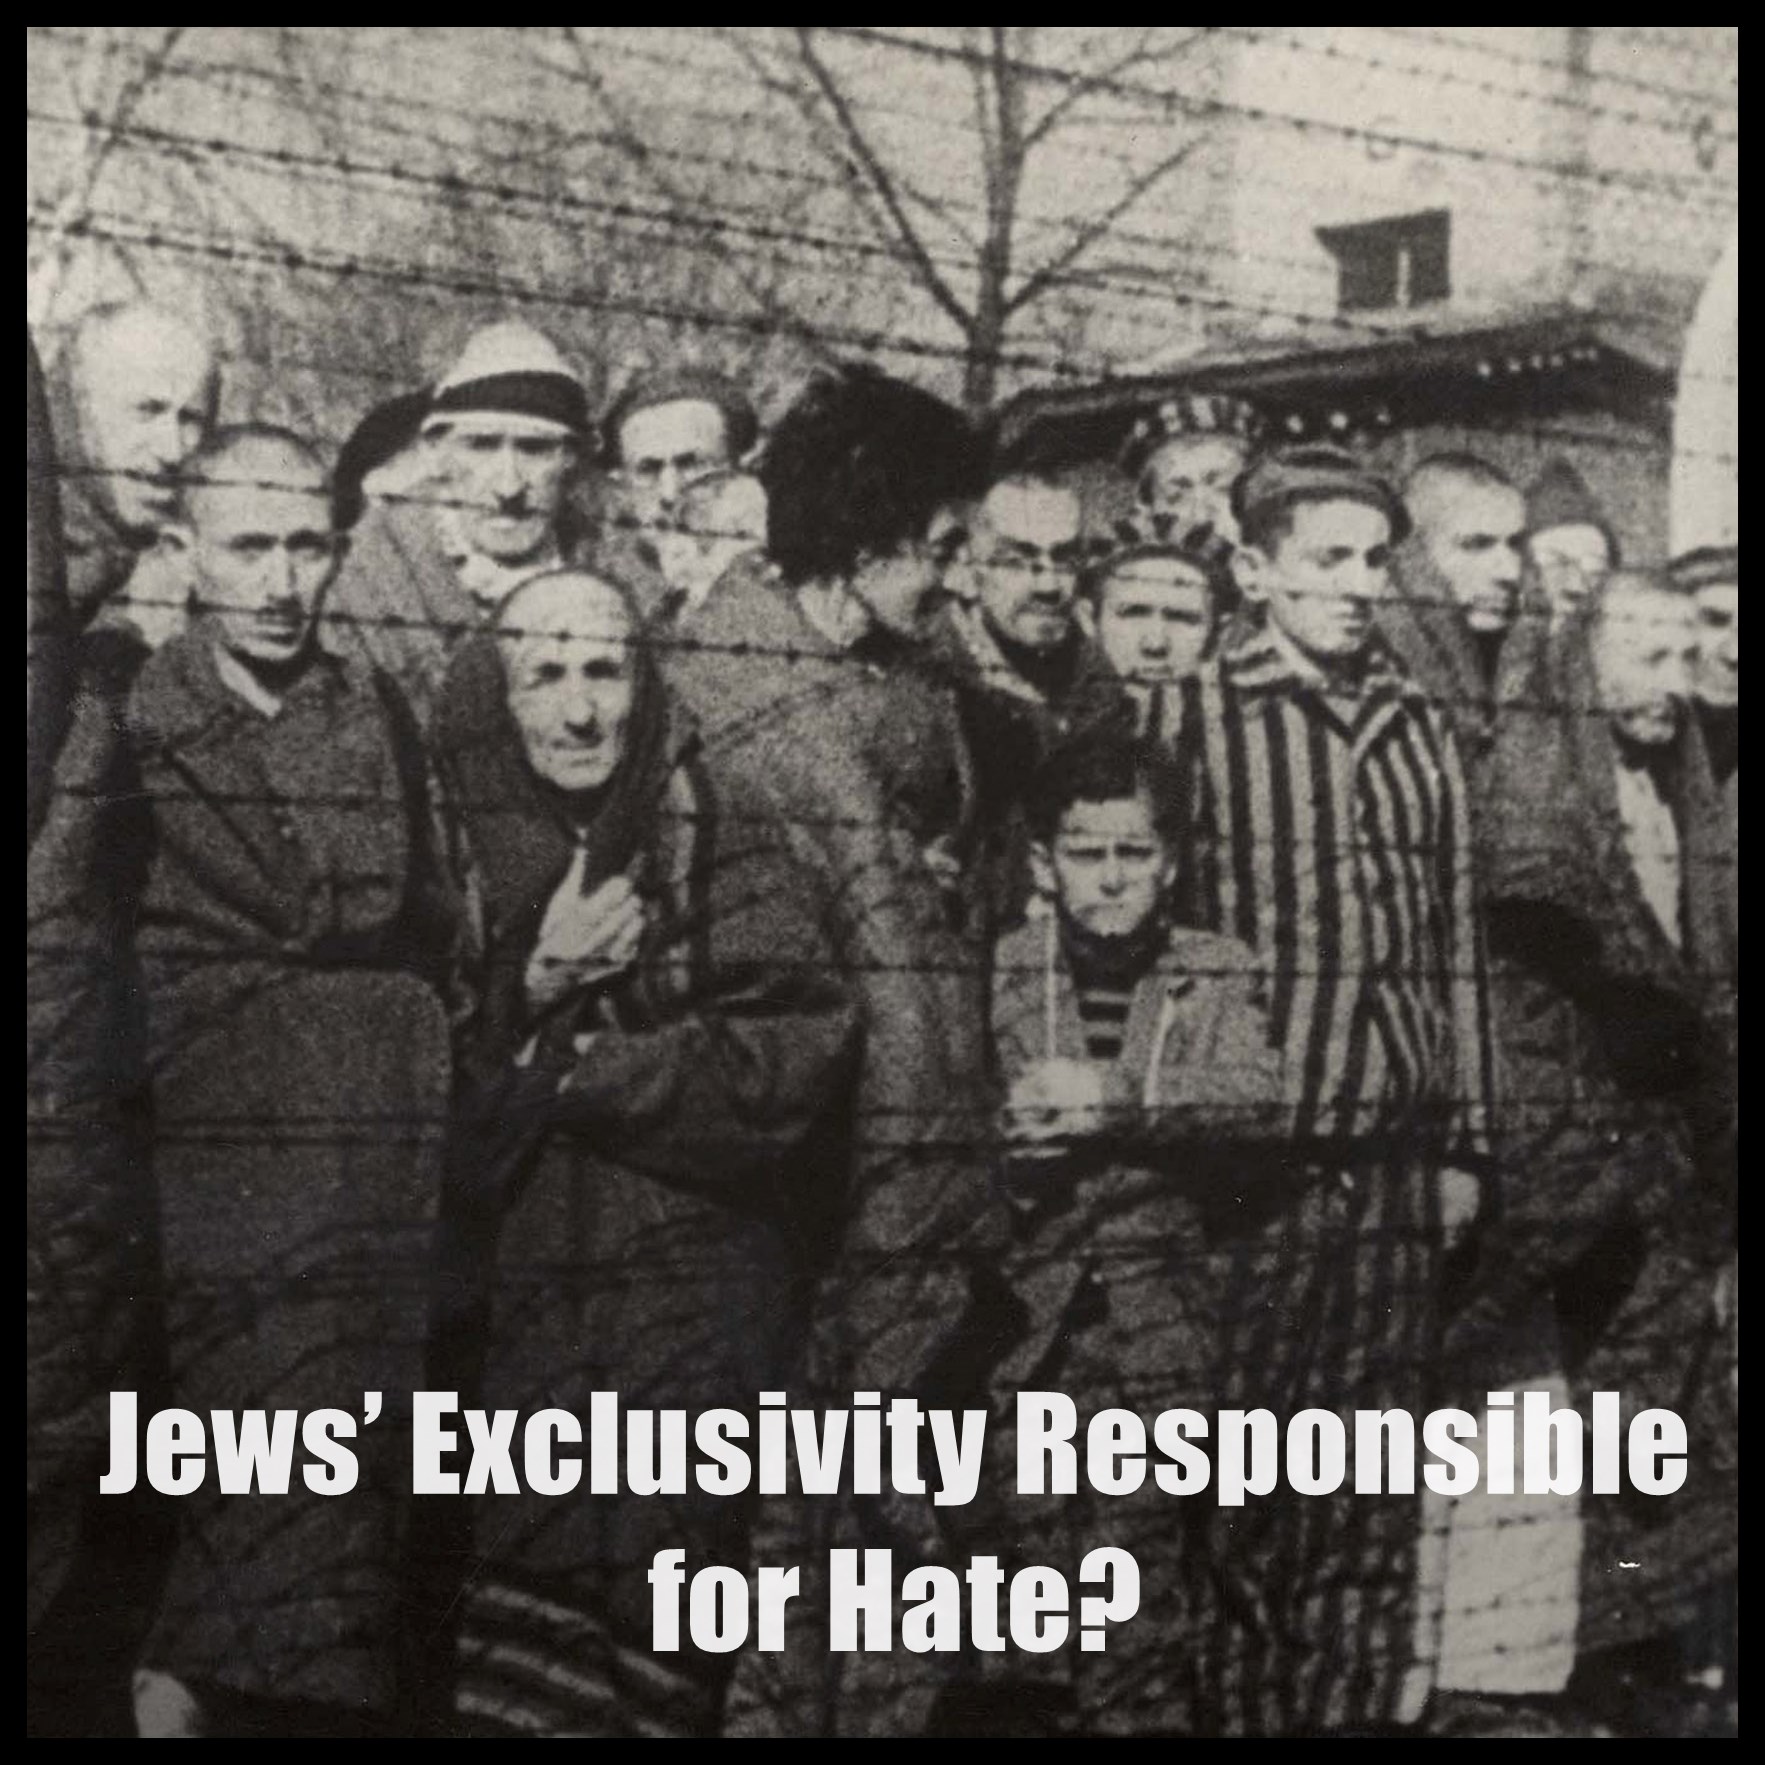 Are the Jews’ Exclusivity Responsible for Hate?